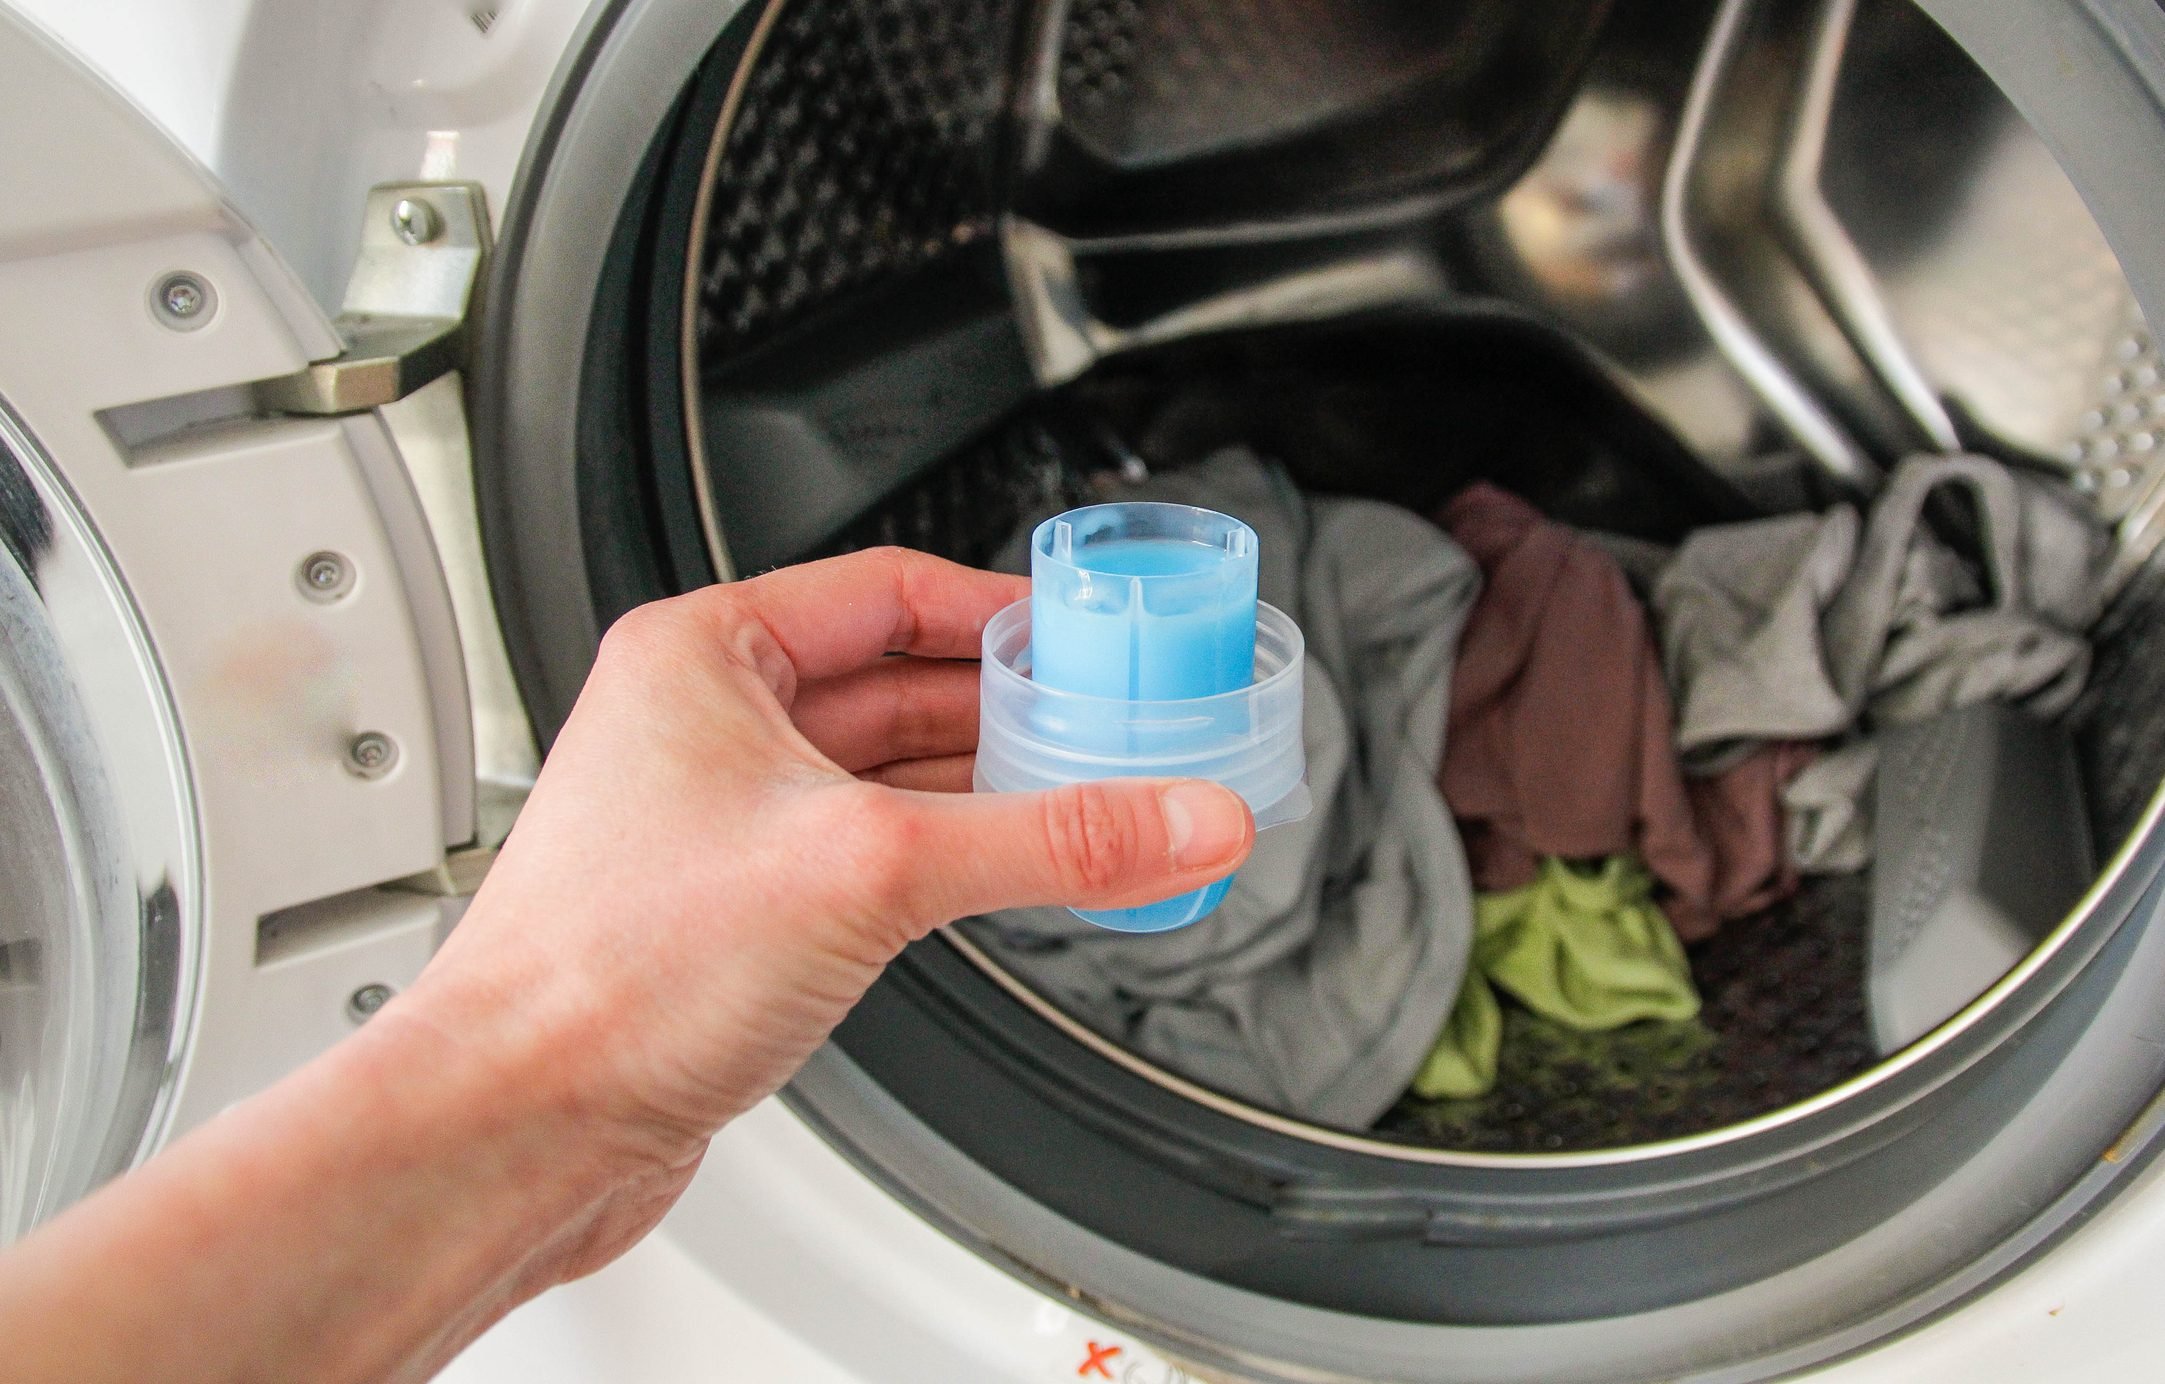 What to Do When You Lose Your Laundry Detergent Cap? - All About Detergents